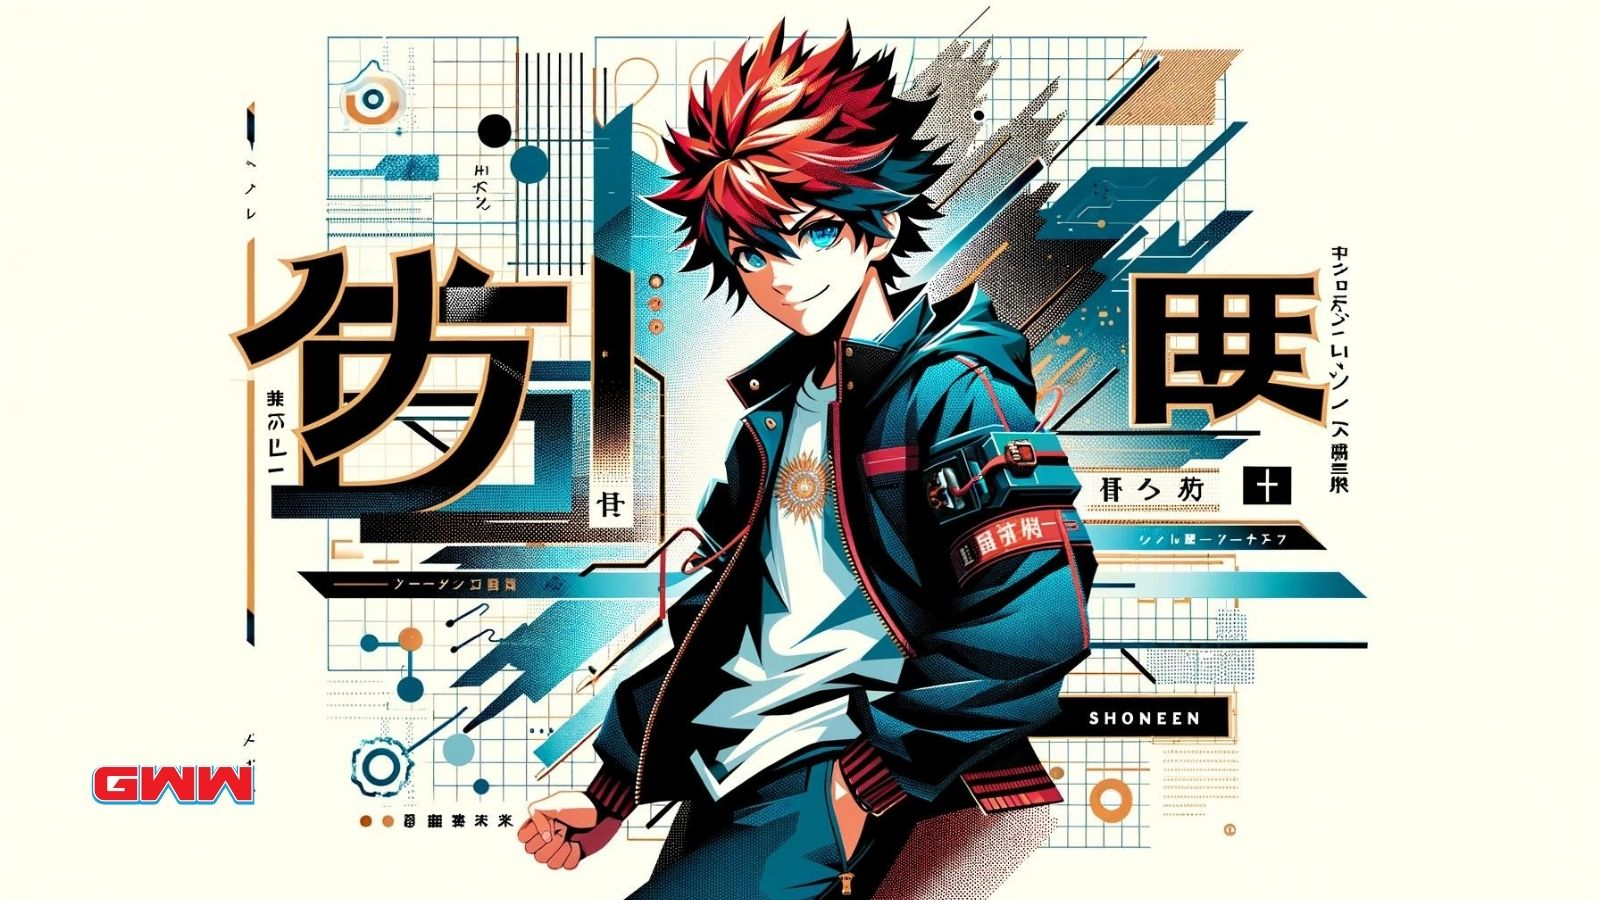 Graphic of 'Shōnen' with anime boy in red hair